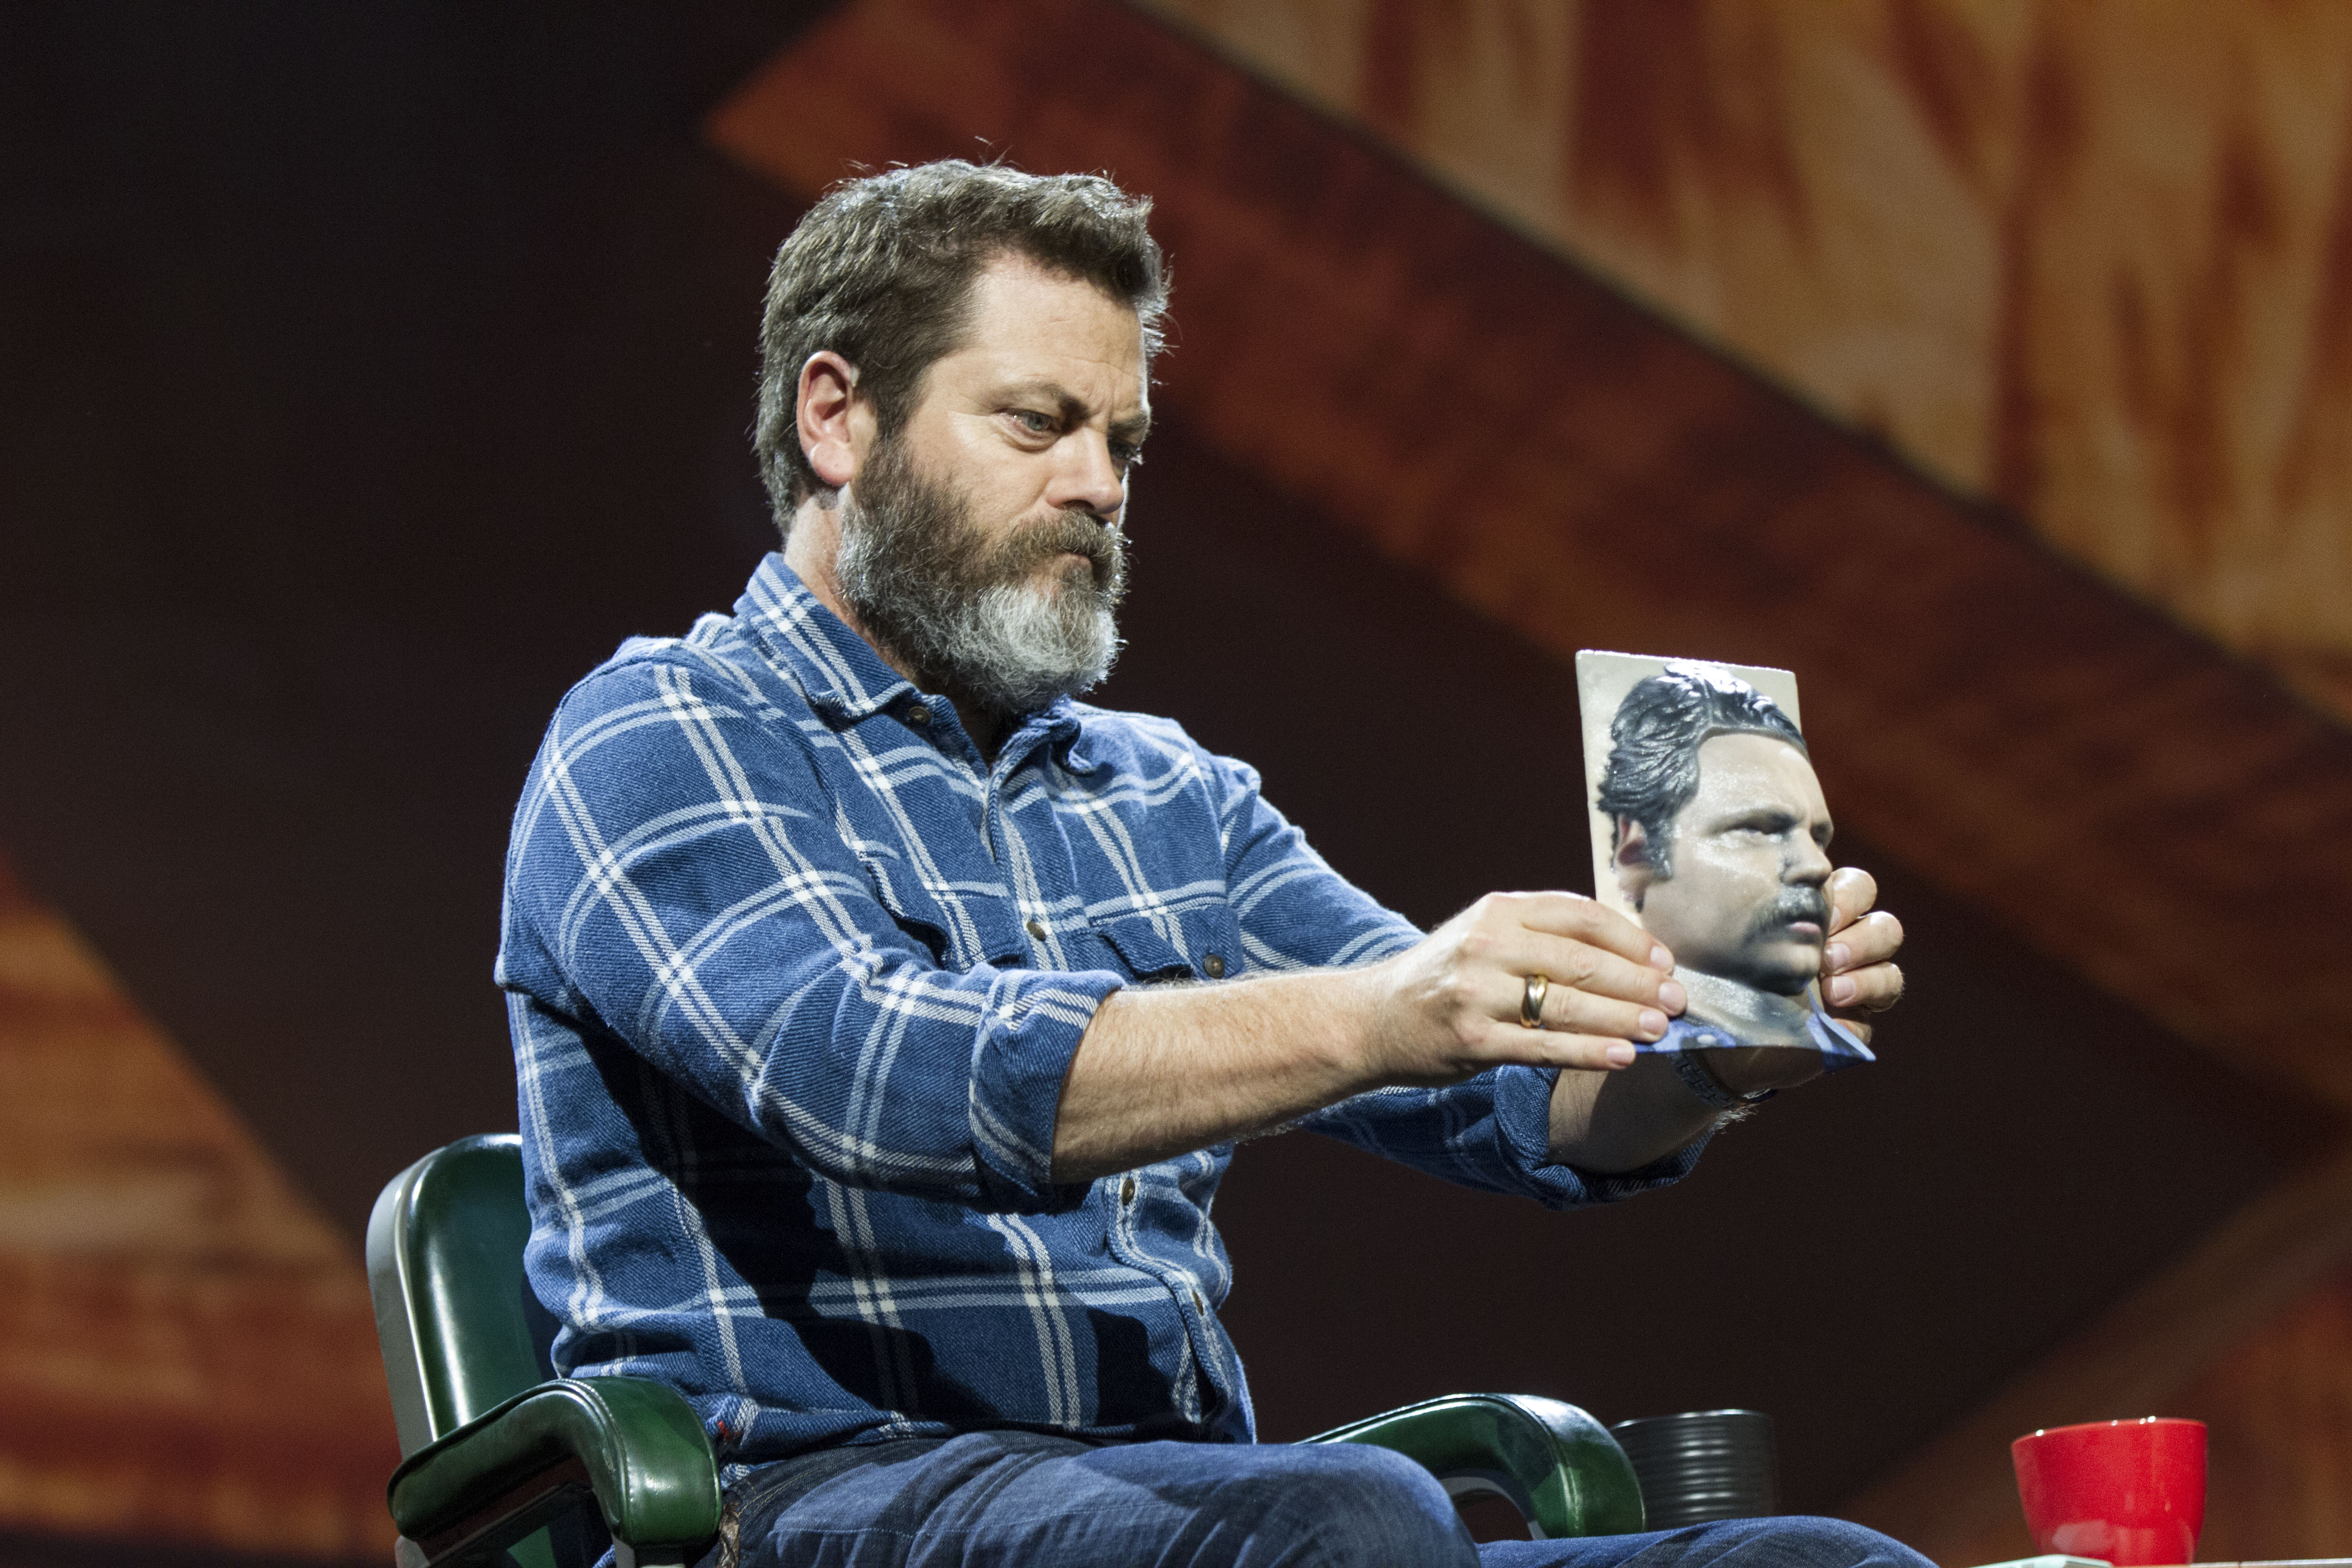 At Adobe's Max conference, Parks and Recreation actor Nick Offerman holds a 3D-printed model of his head reconstructed from a photo.